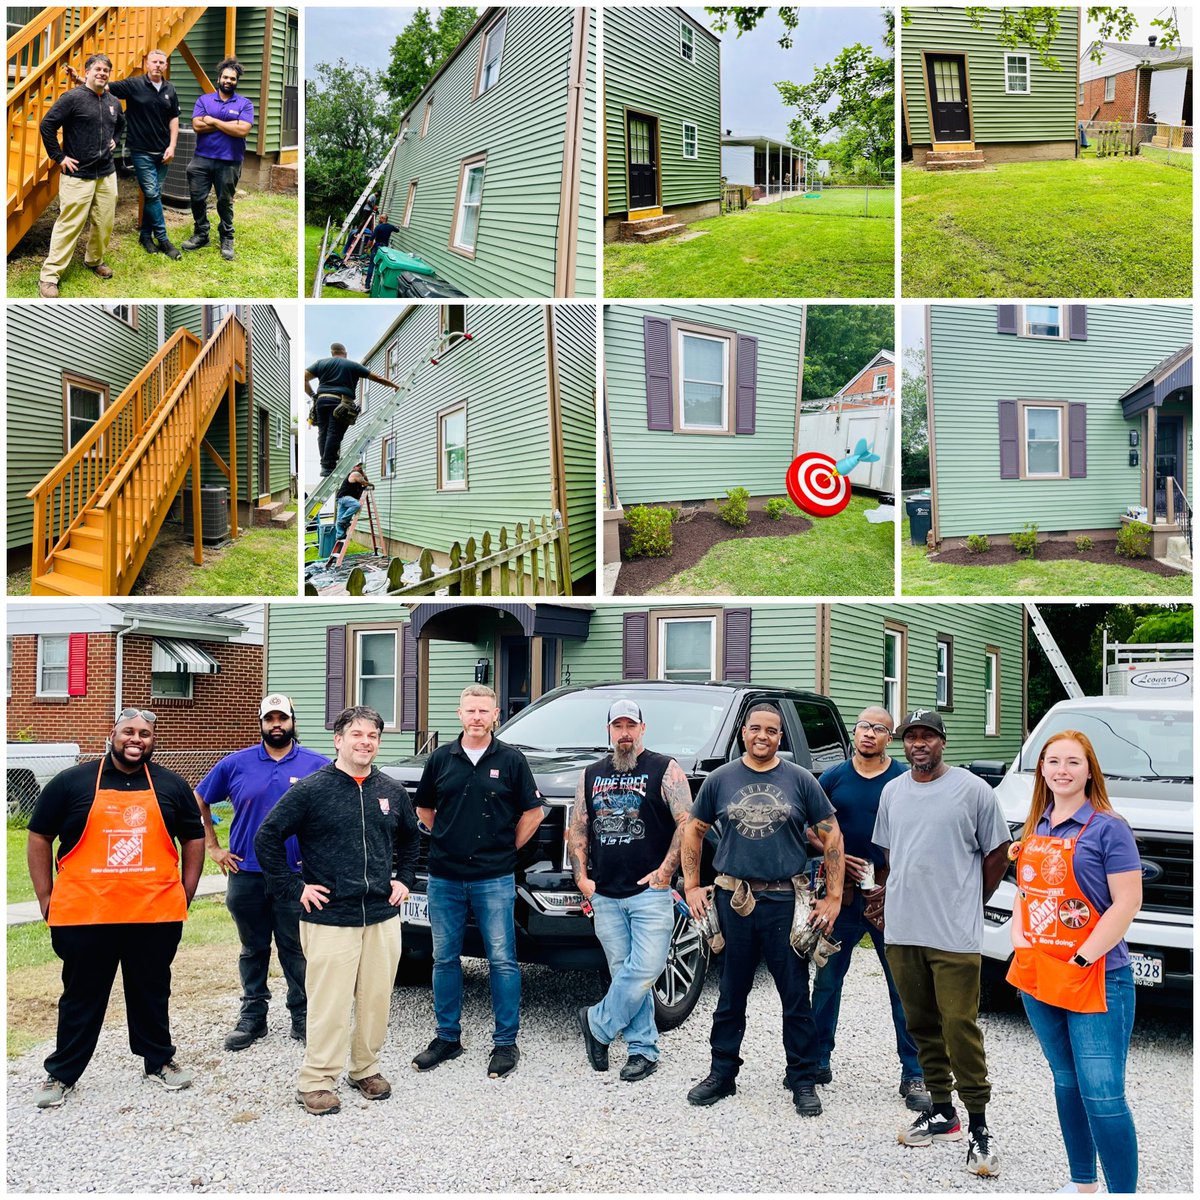 What an awesome Team Depot project today for Regenesis! Thanks to all who participated! Shout out to HDIS for being a great partner! 🪟#givingback #buildingstrongrelationships #community @HomeDepotFound @dpattersonTHD @jwthd @kmn293